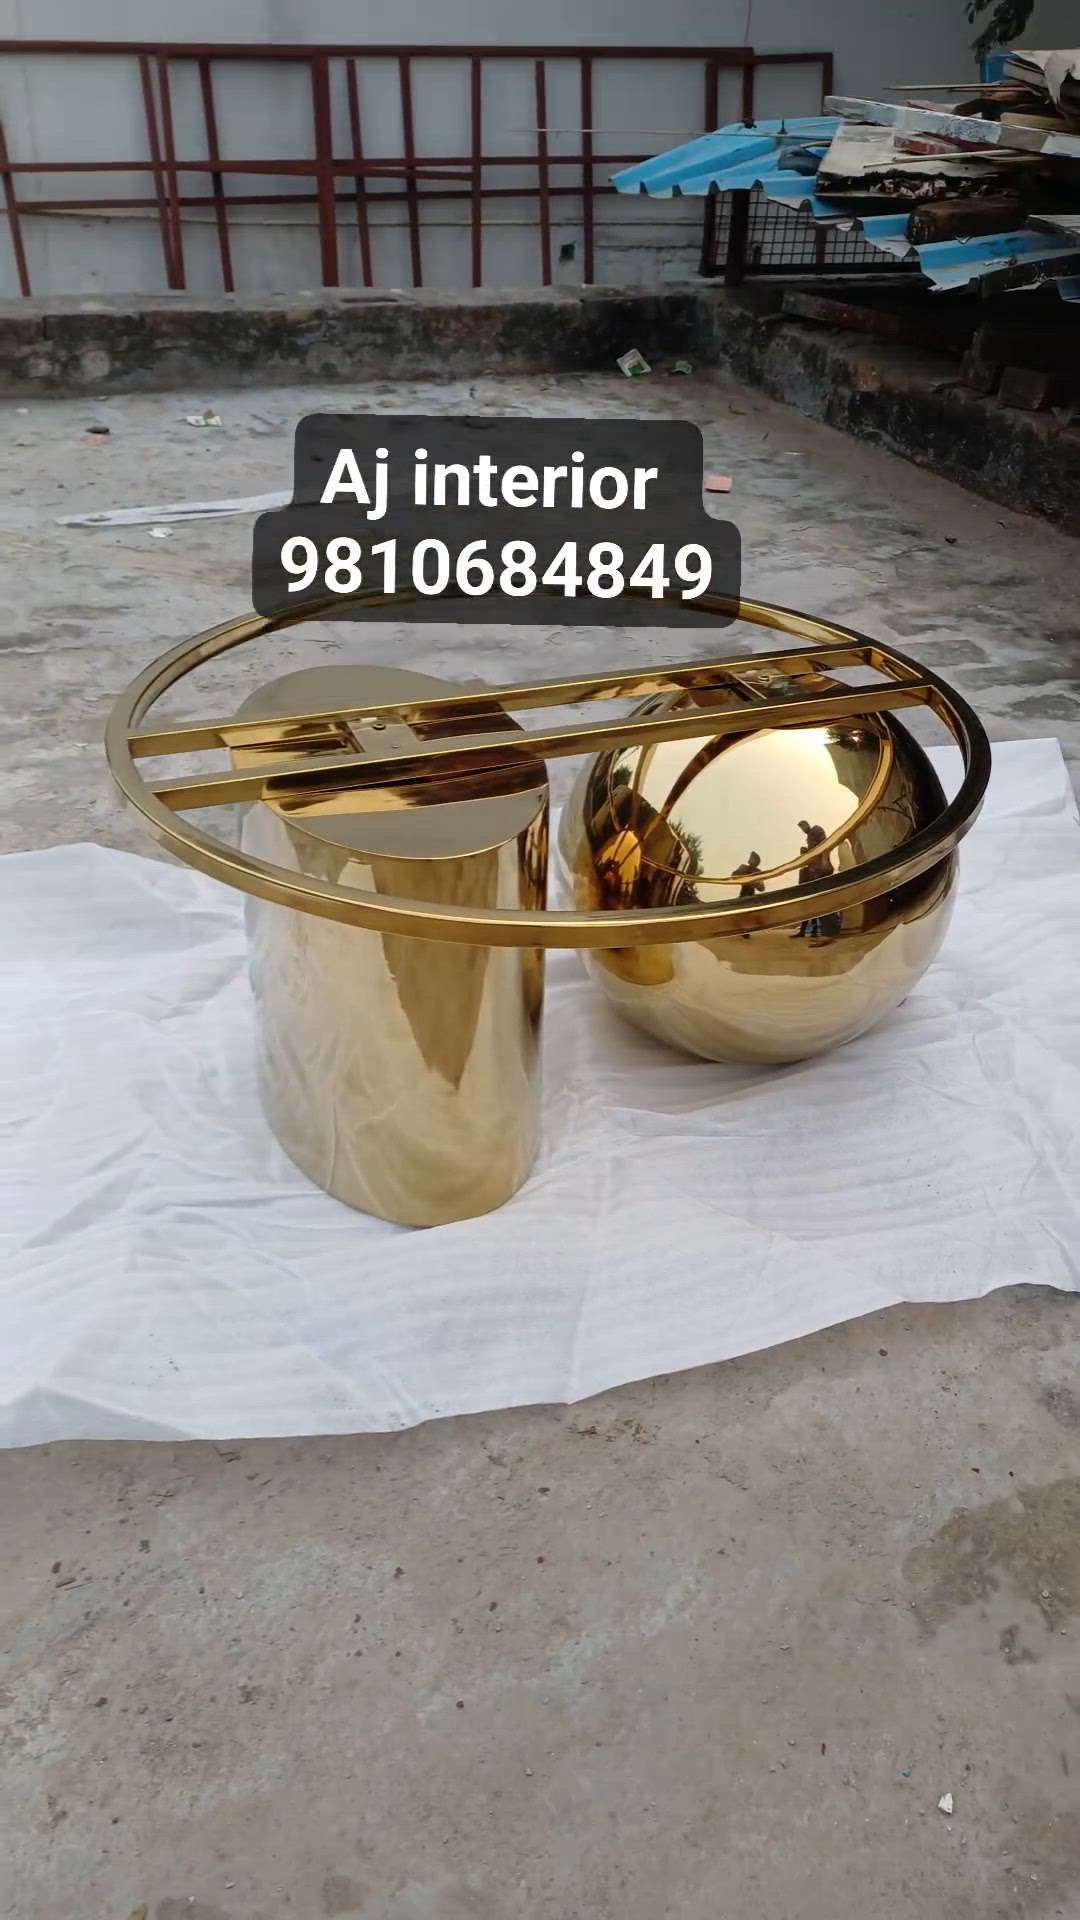 center table work in stainless steel with pvd coating exclusive Design customized available deliver in nagpur 💯 👍🏻